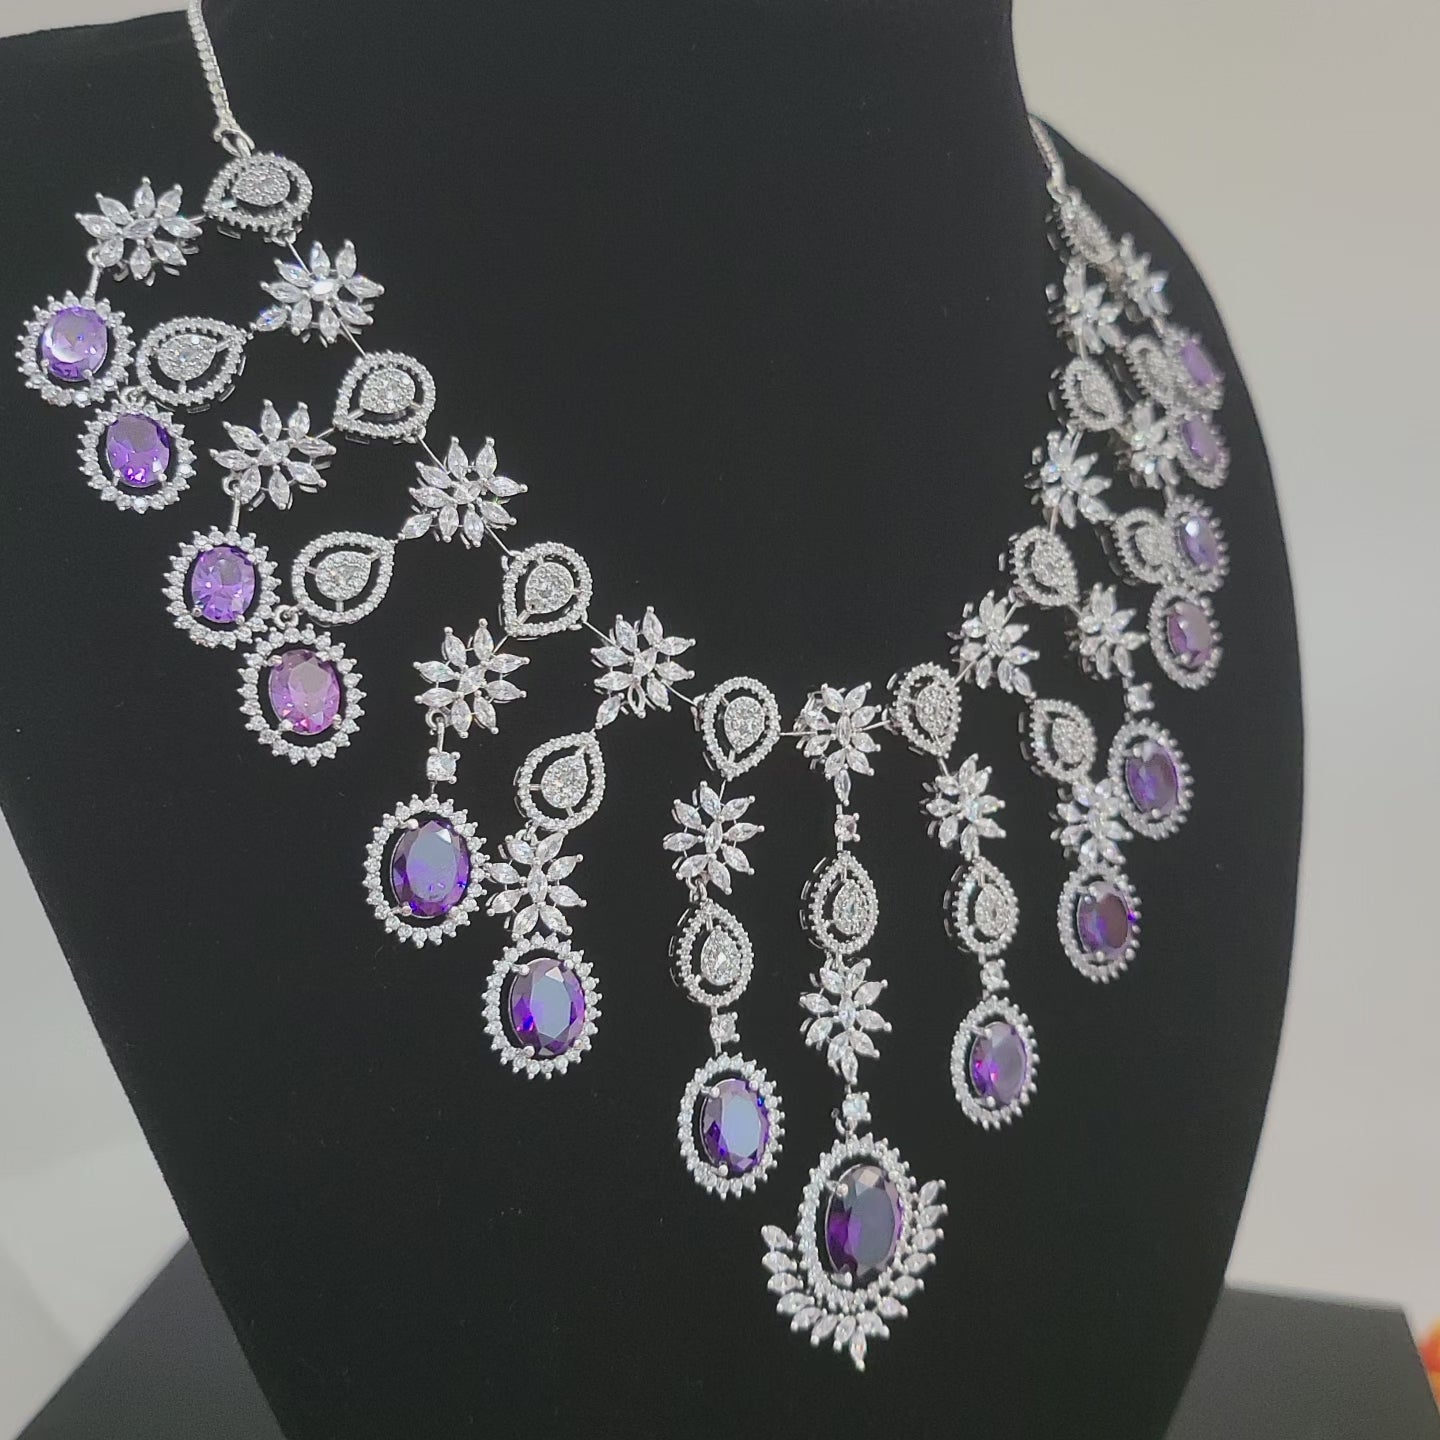 Sparkling Crystal Bridal Bridal Jewellery Set Silver With Silver Diamonds  Available Includes Necklace, Dangle Earrings, And Statement Necklaces  Perfect For Brides And Bridemaids From Commo_dpp, $3.63 | DHgate.Com